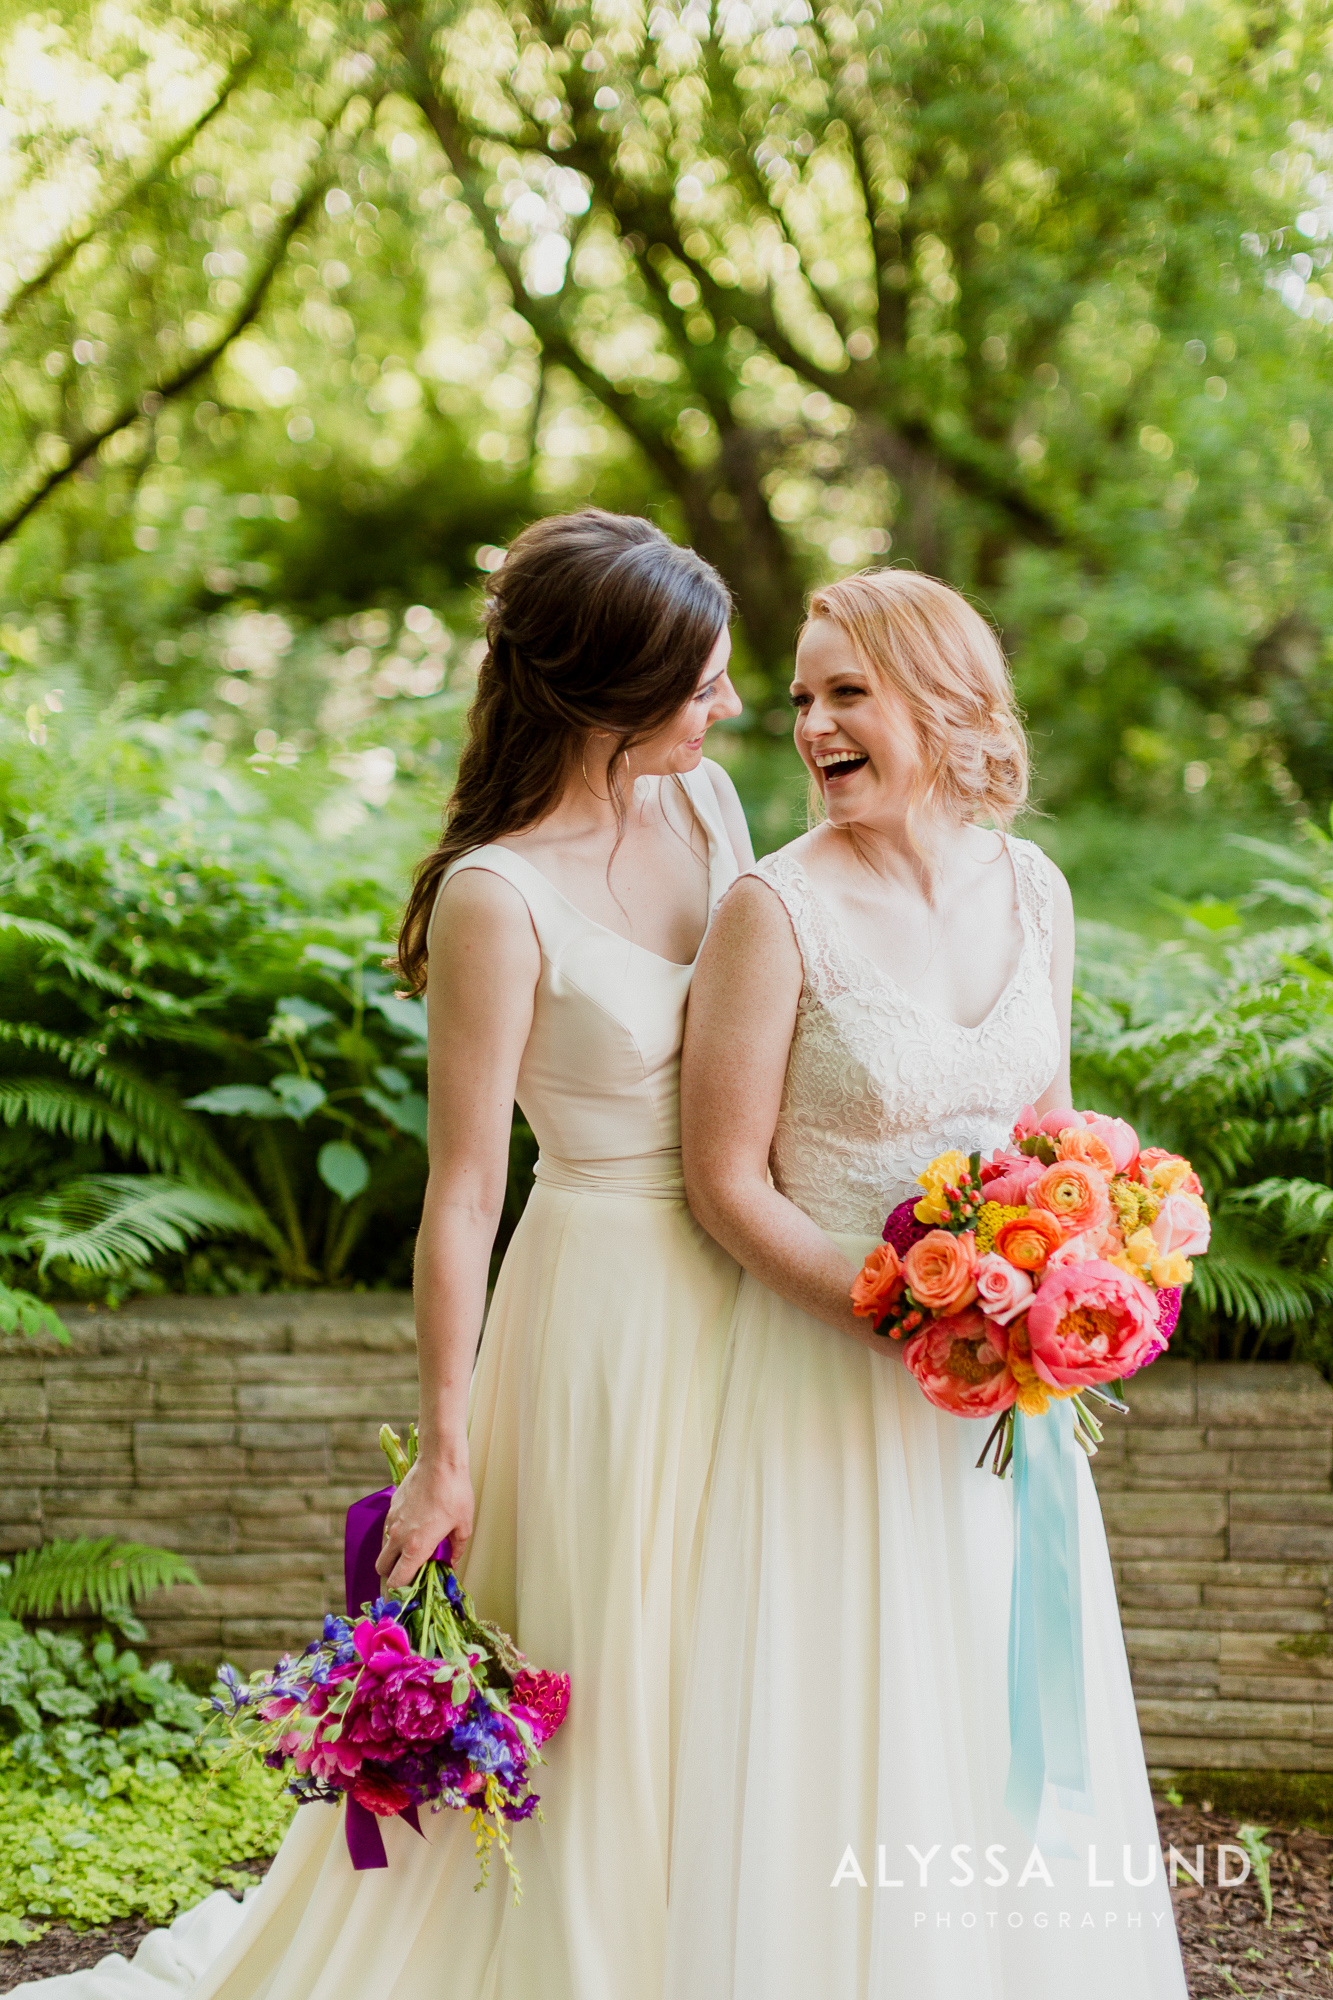 Queer wedding photography inspiration by Alyssa Lund Photography-28.jpg